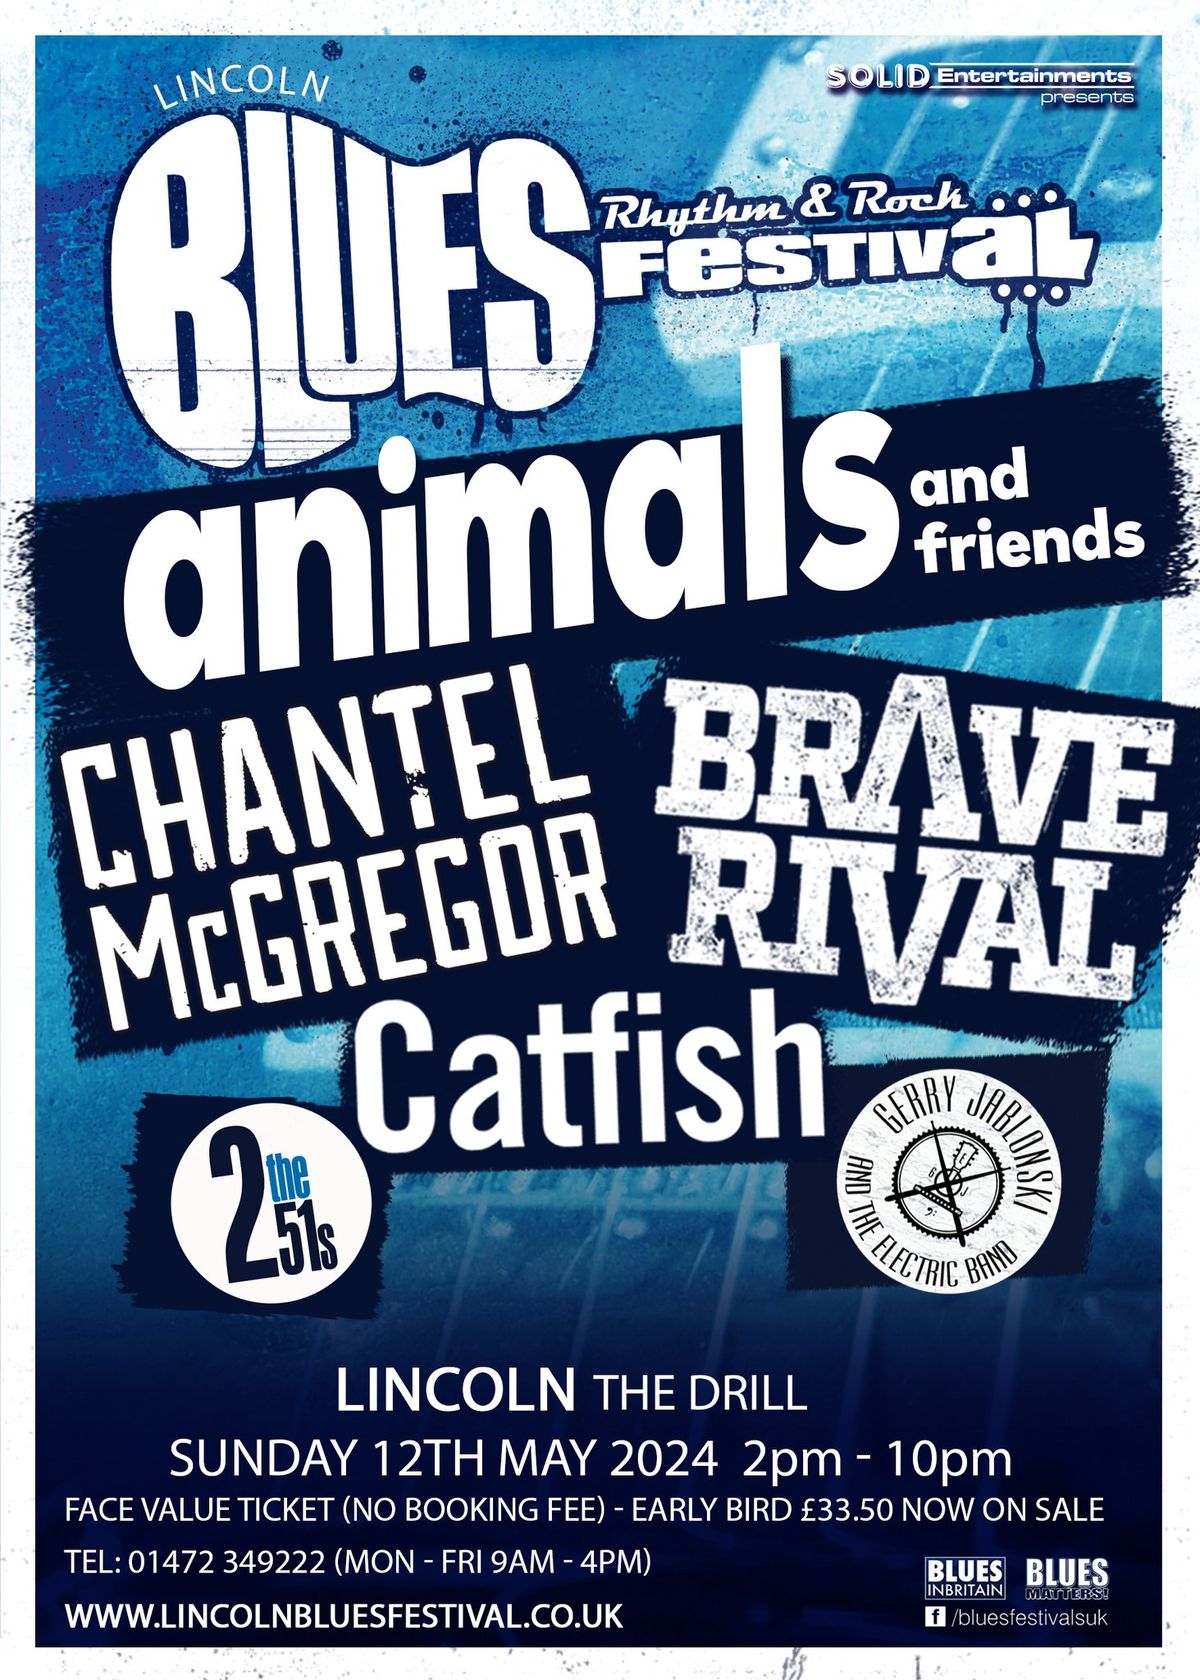 Catfish appearance cxd event still going ahead - Catfish at Lincoln Blues, Rhythm and Rock festival